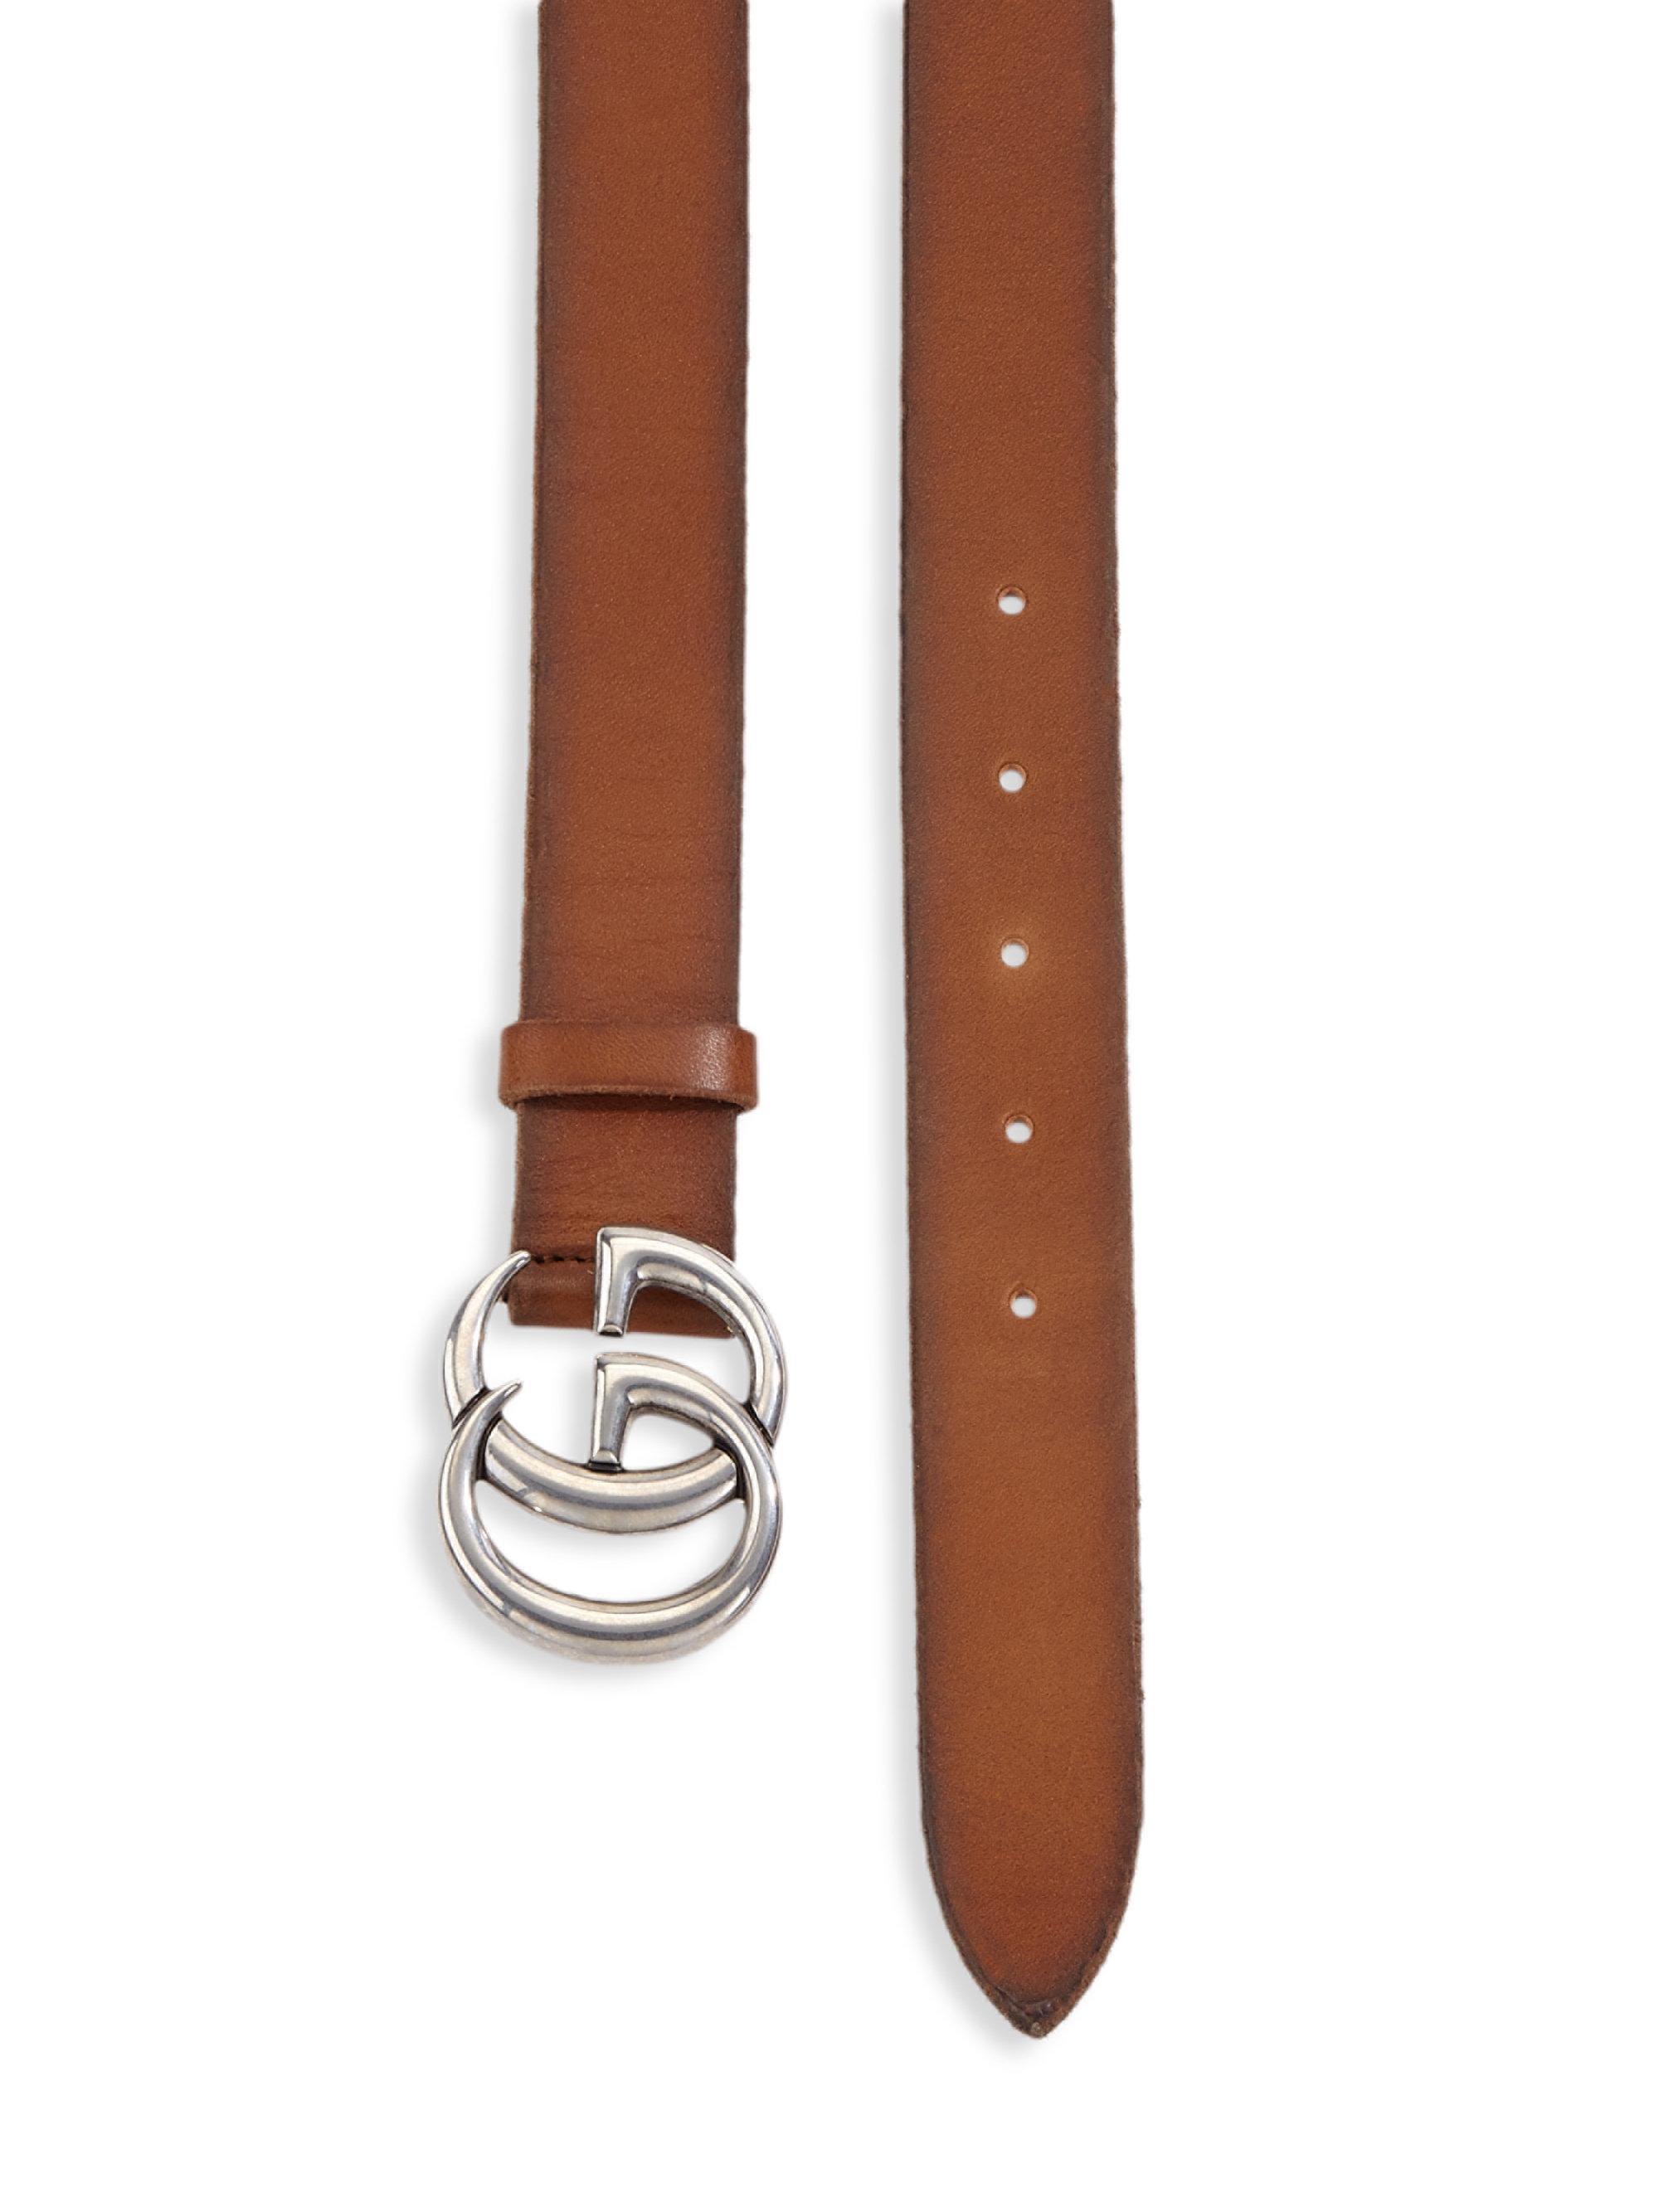 Gucci Gg Marmont Leather Belt in Brown for Men - Lyst